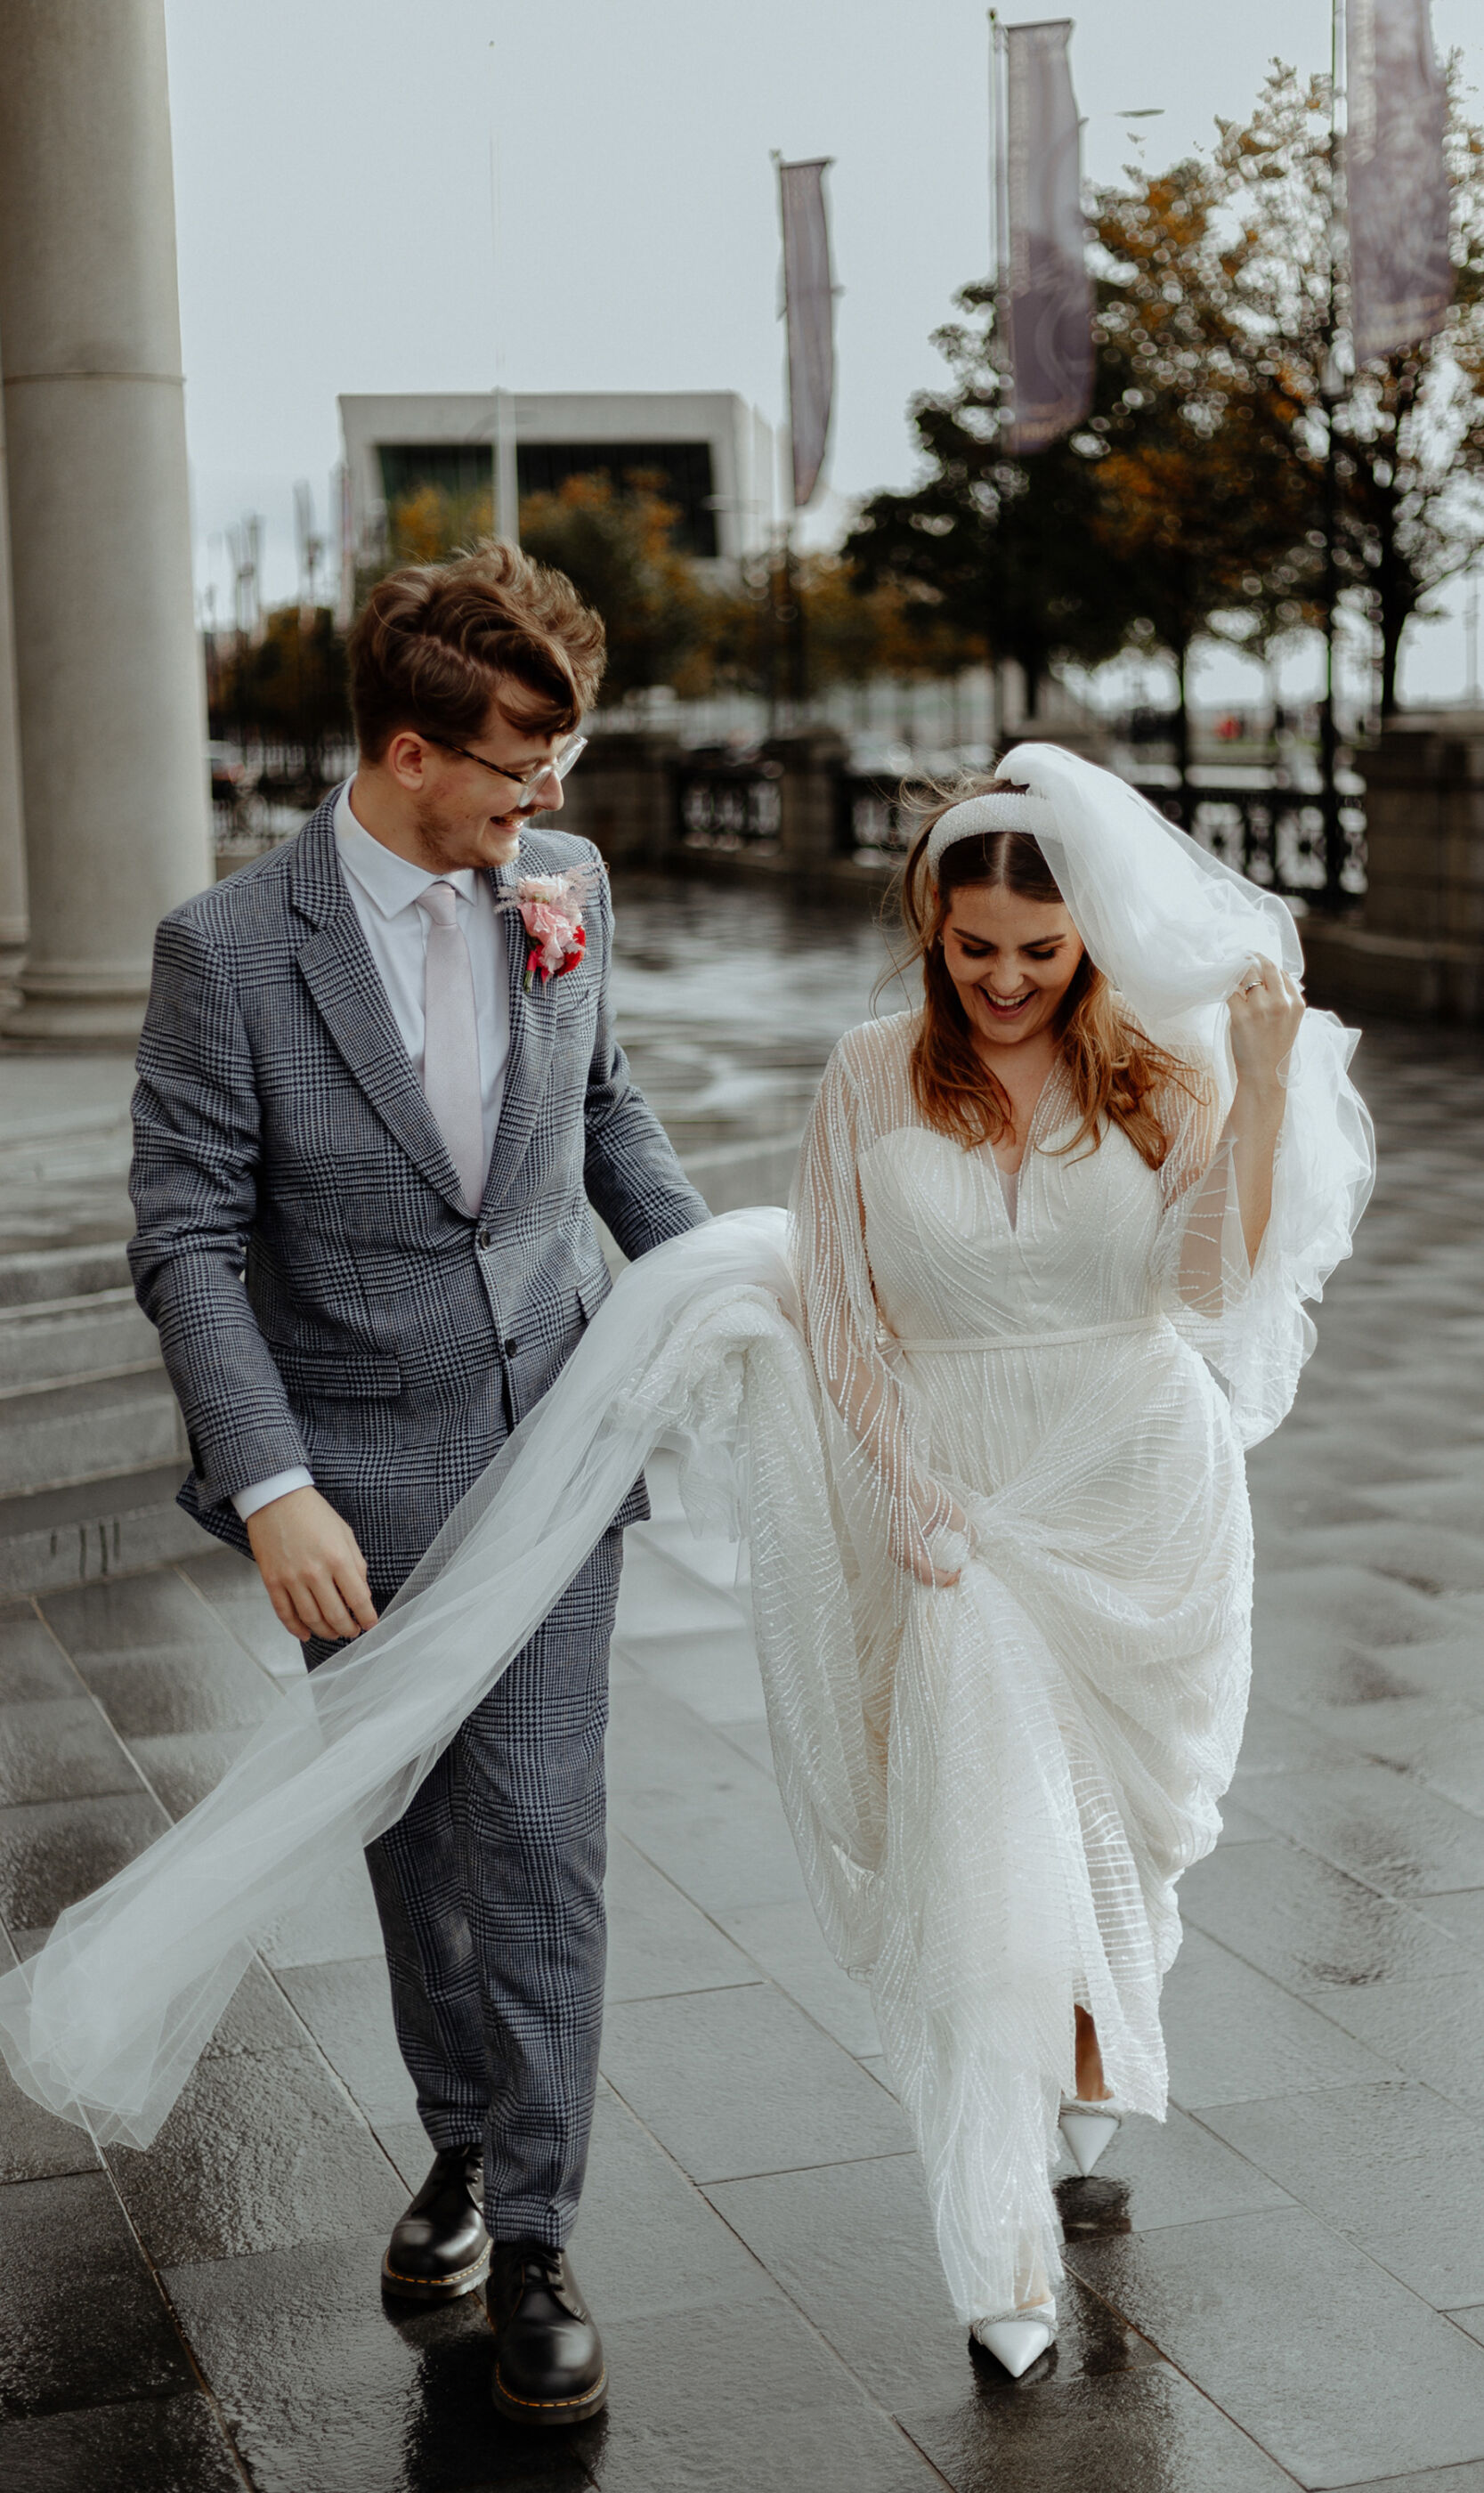 Bride & Groom in Liverpool city. Bride wears a sequin wedding dress, pearl headband, pointed toe shoe and long veil that is being gathered by the groom.